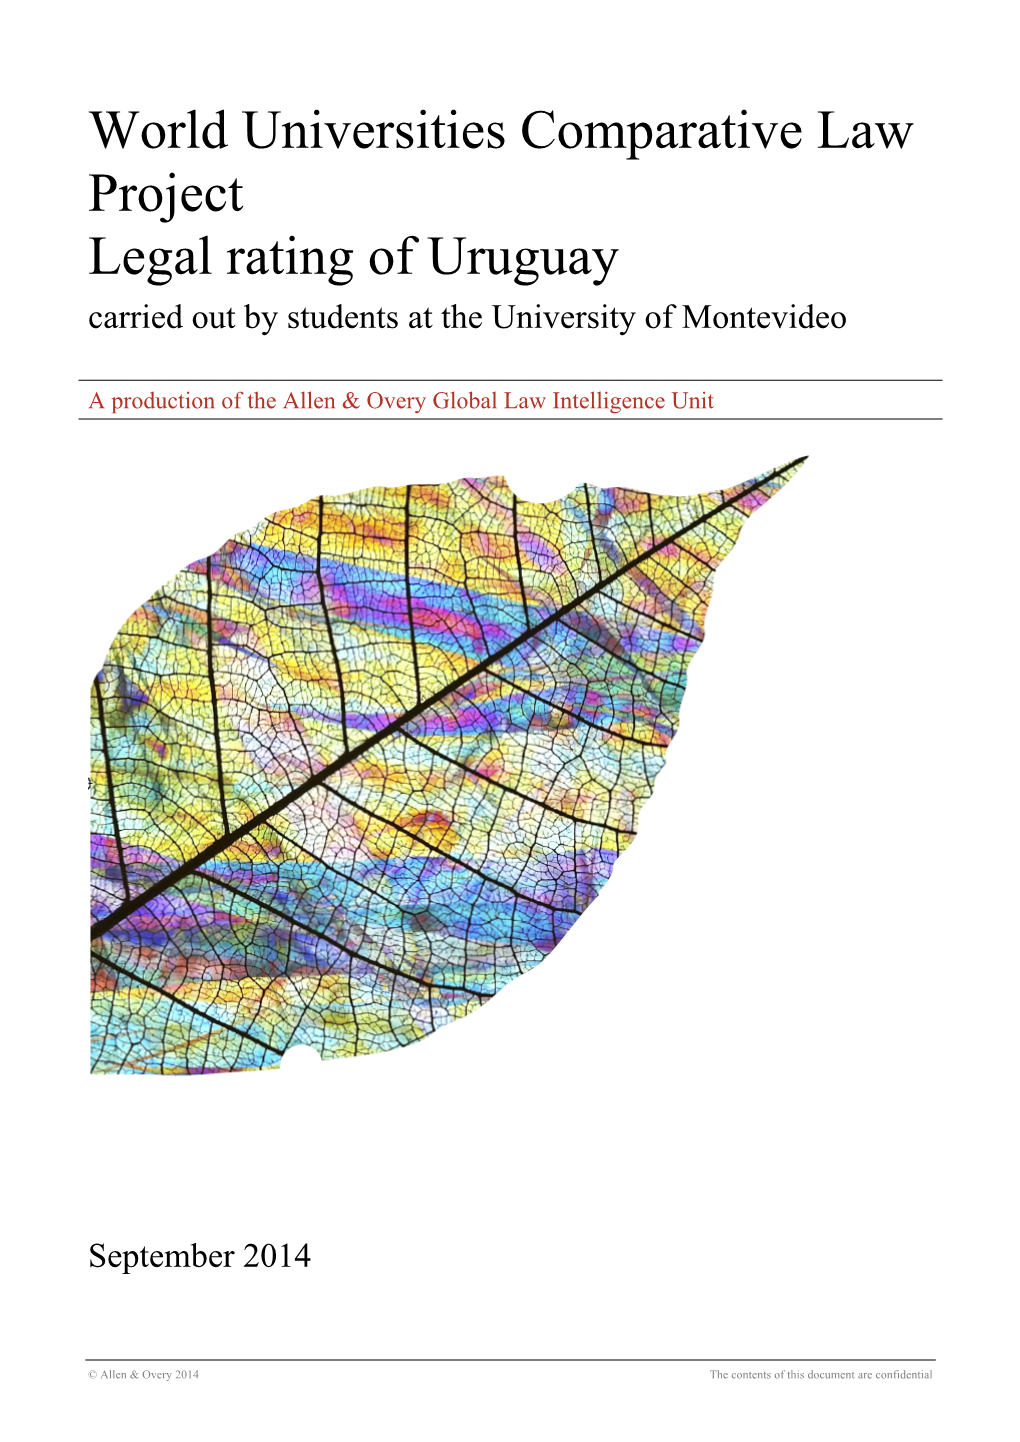 World Universities Comparative Law Project Legal Rating of Uruguay Carried out by Students at the University of Montevideo